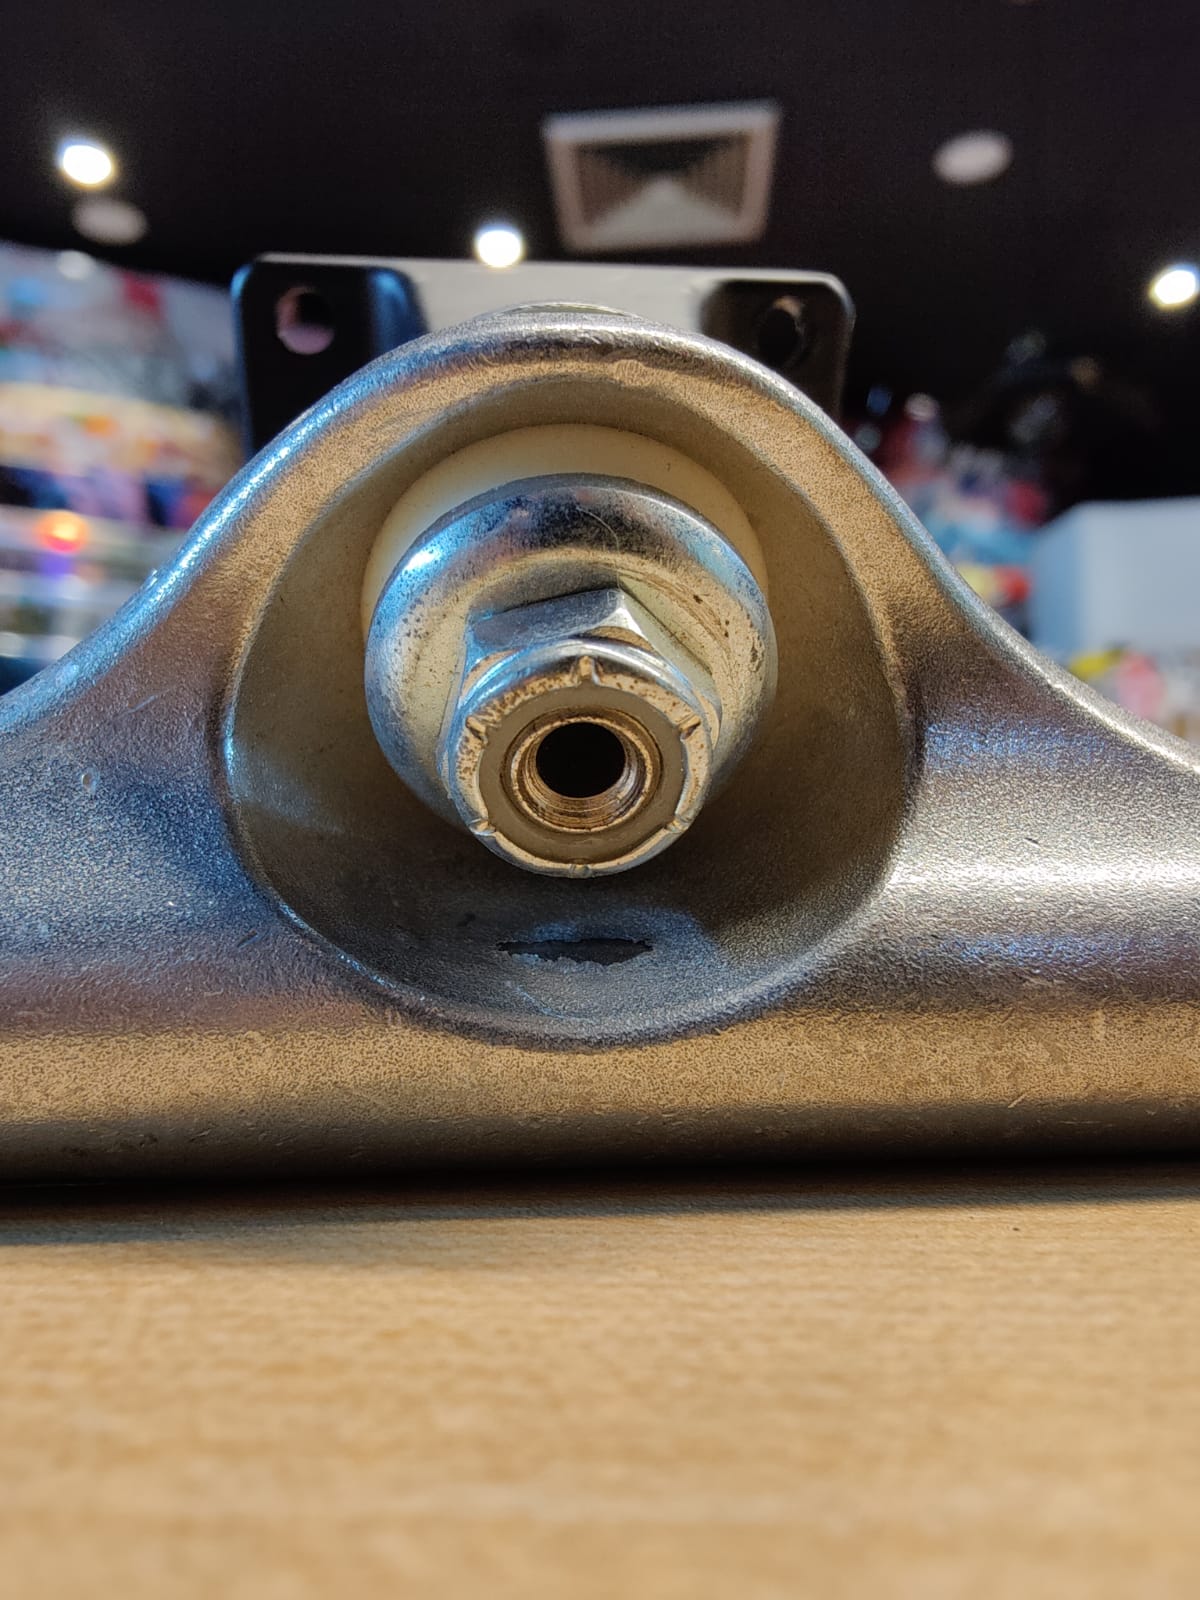 A kingpin is a large bolt nut that controls the amount of pressure put on the bushing. It sticks out of the baseplate.